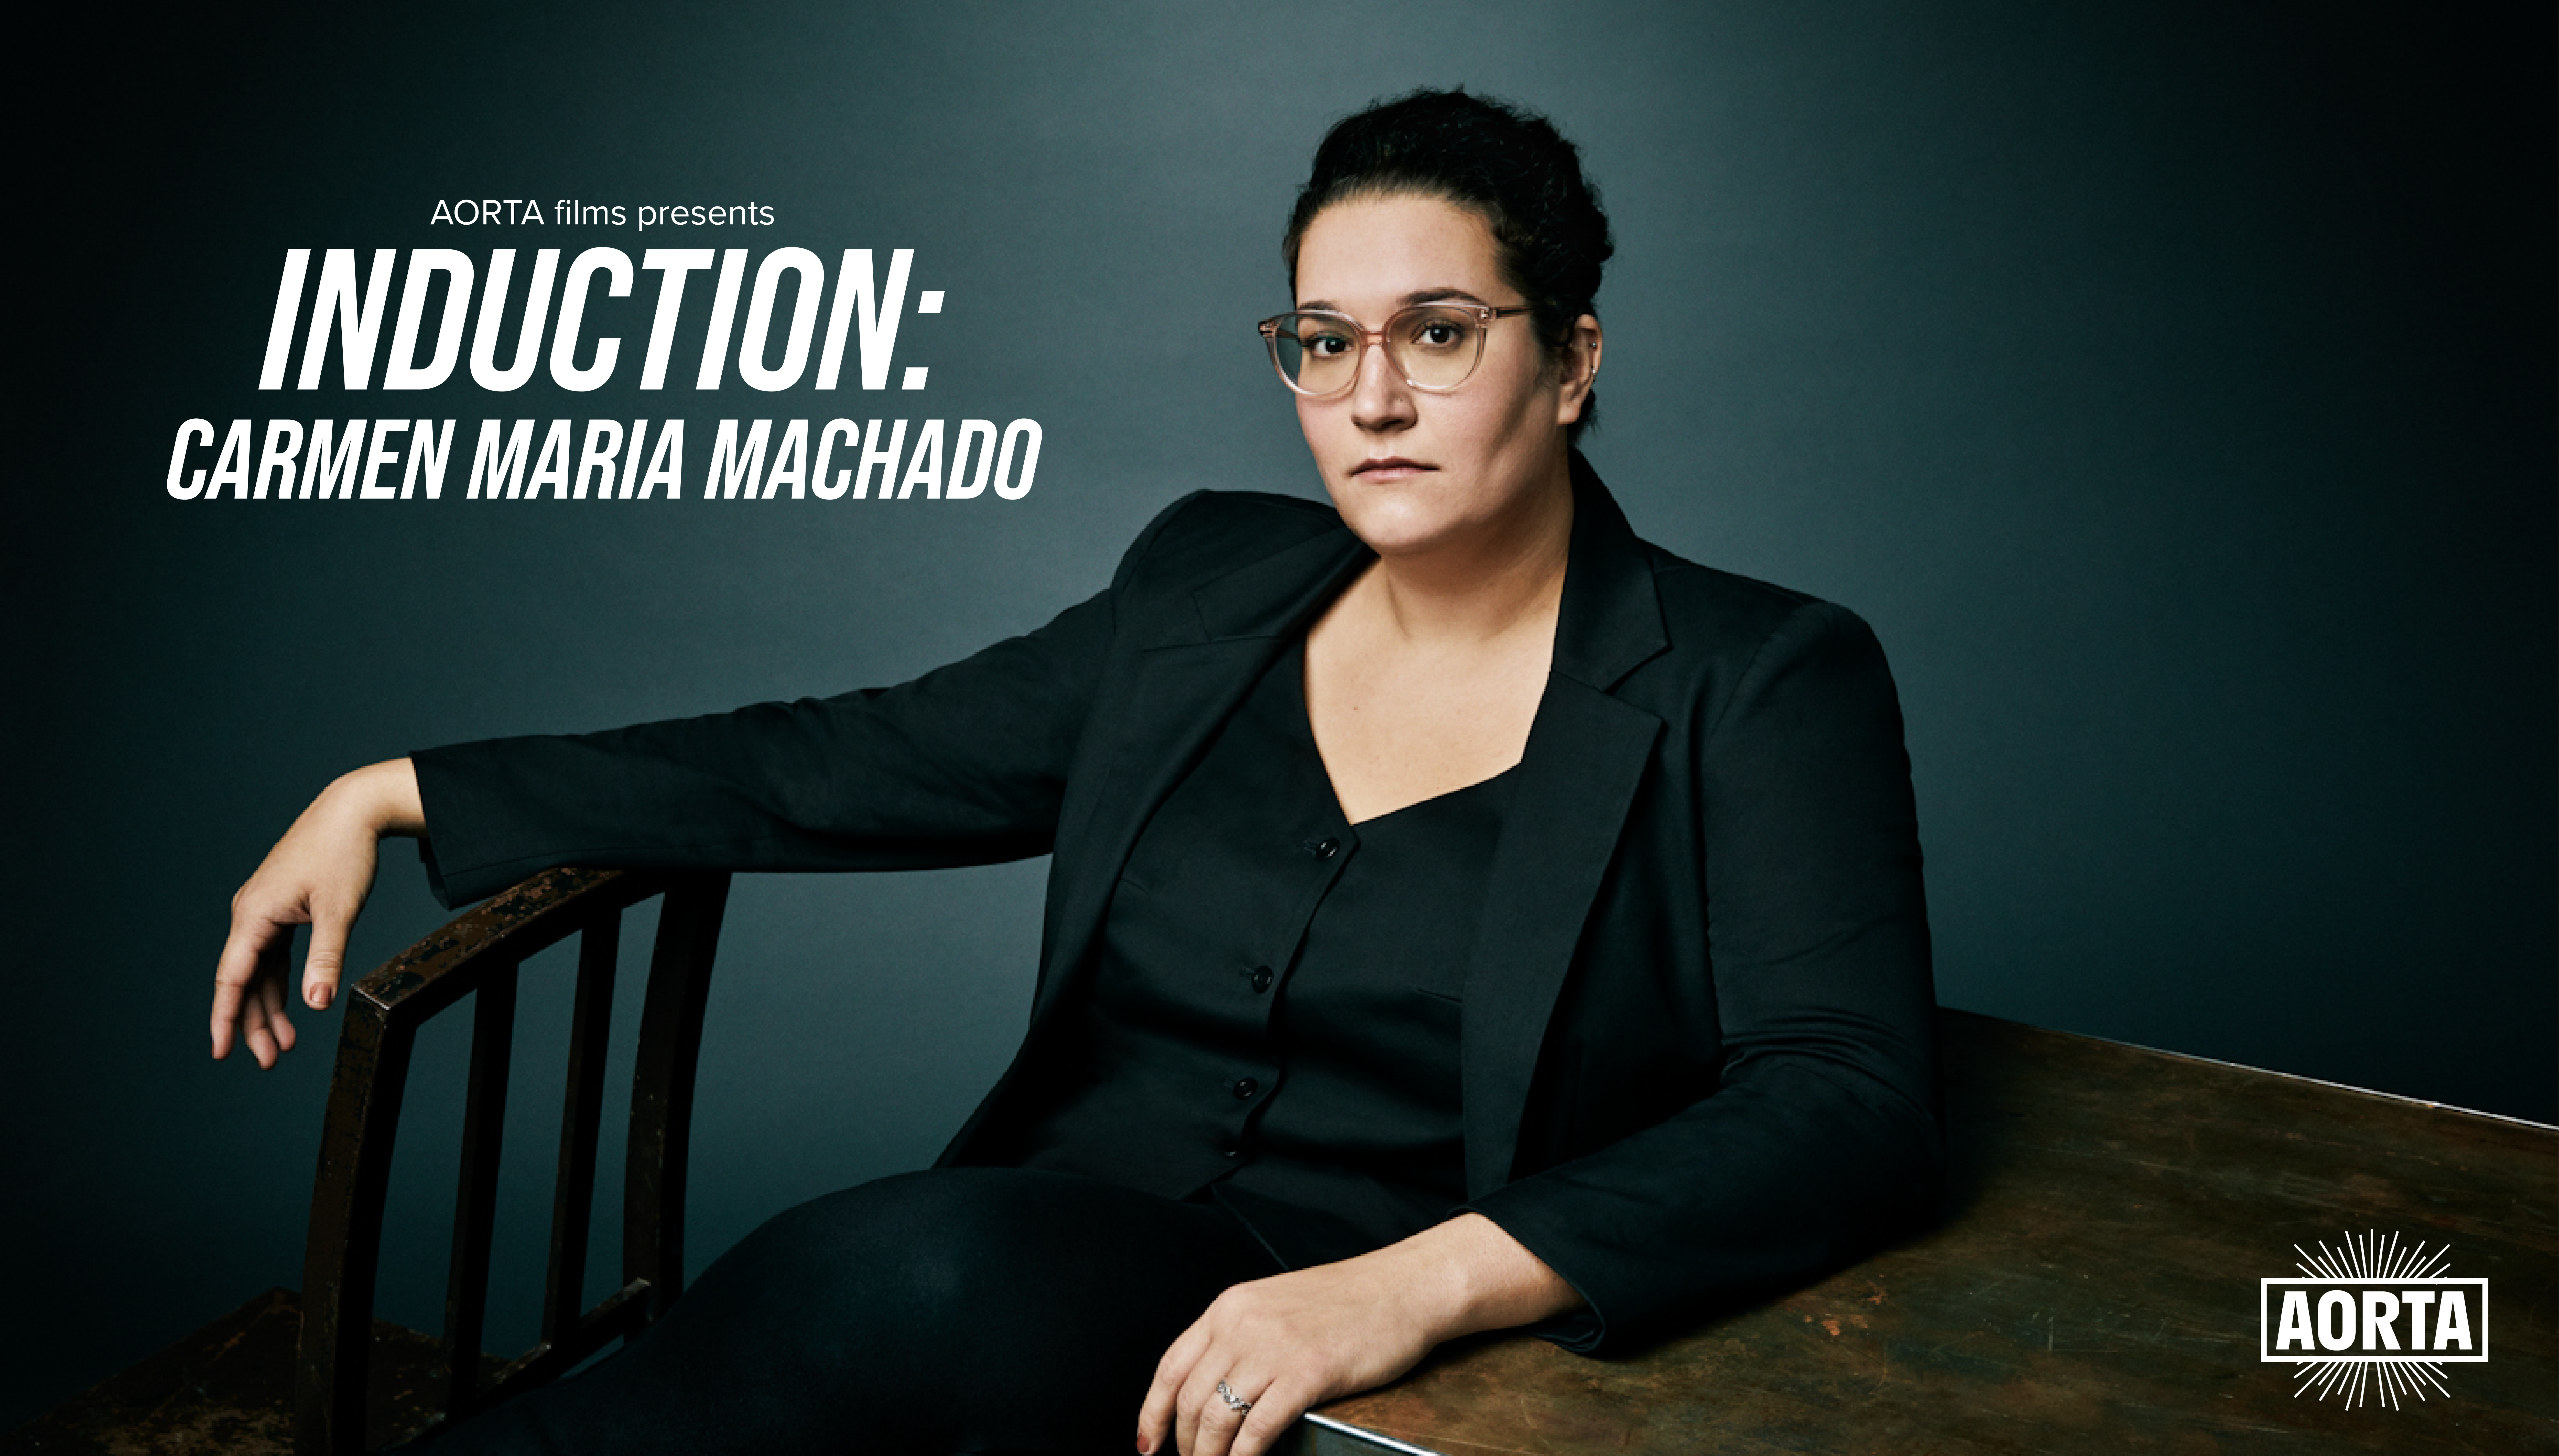 AORTA films announces Carmen Maria Machado as the first guest artist featured in the queer porn studio's new Induction Series